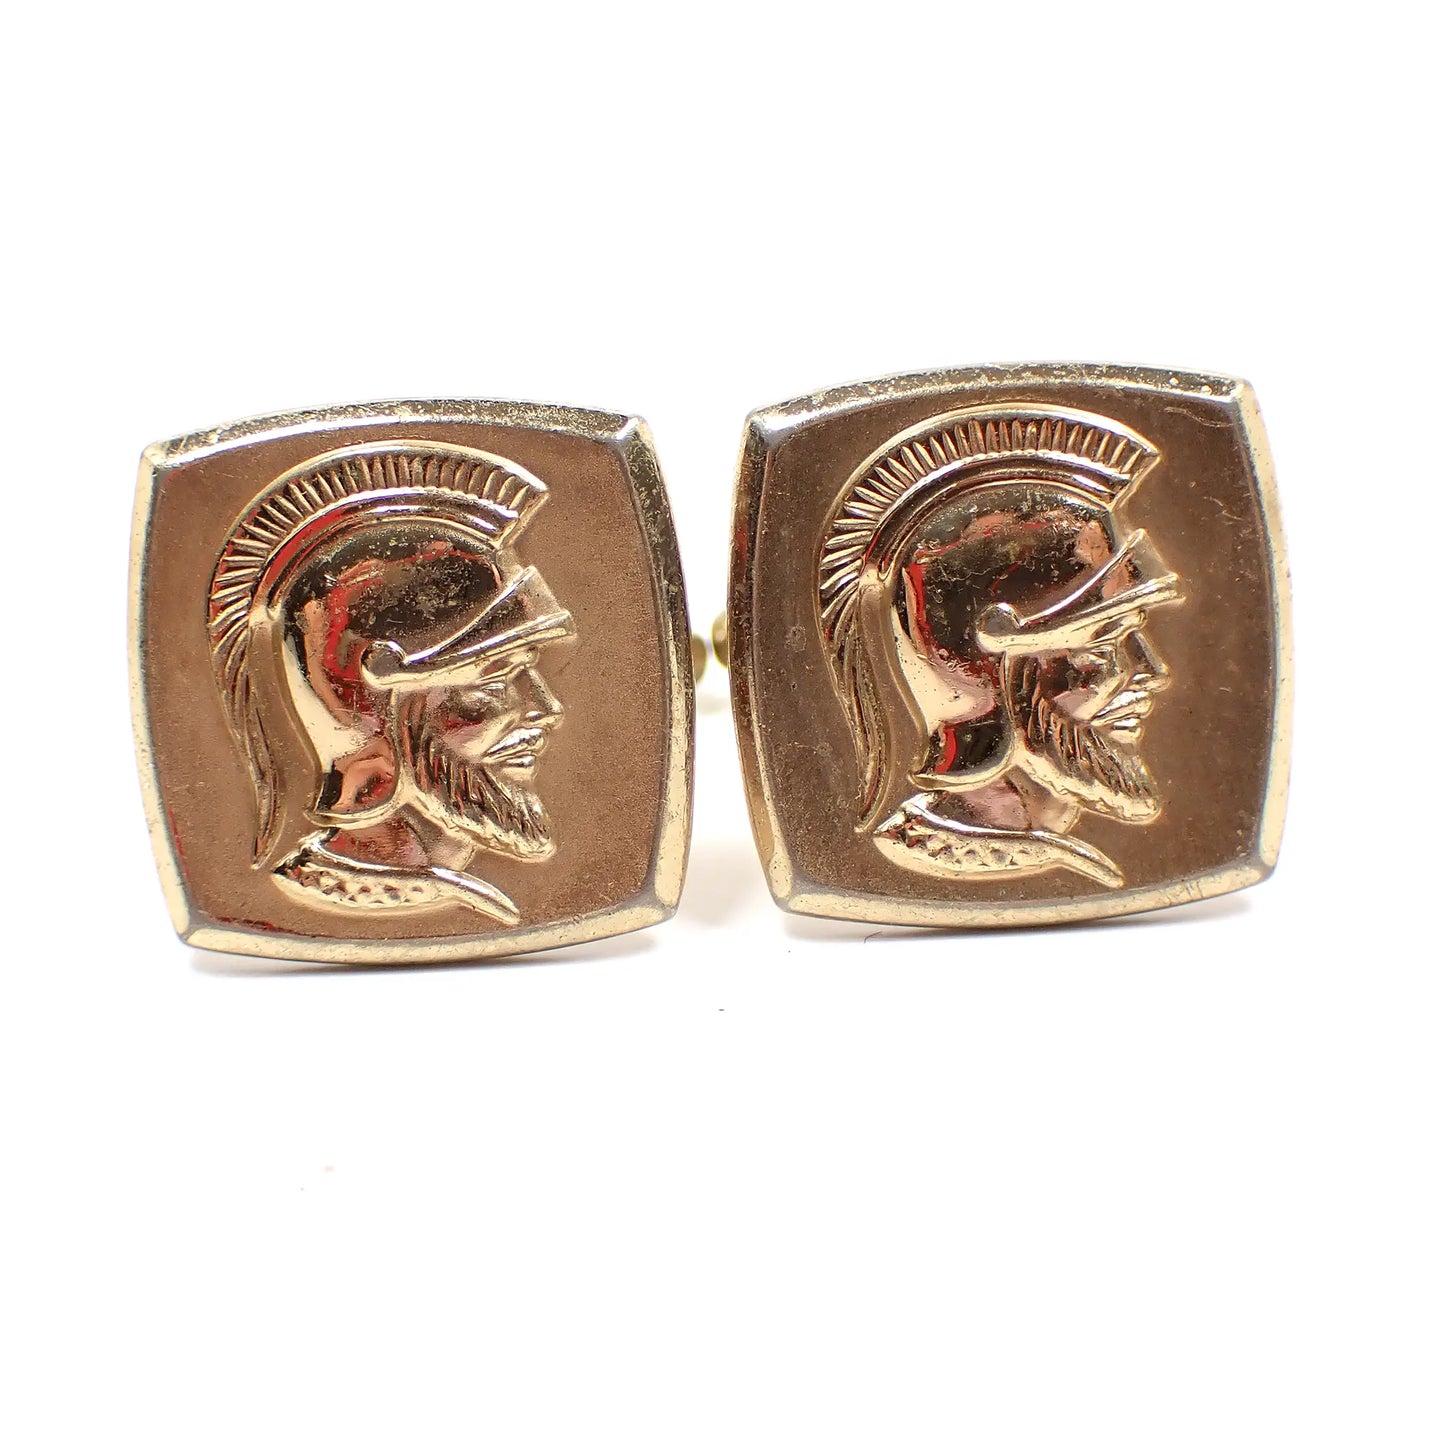 Enlarged front view of the Hickok Mid Century vintage cufflinks. They are curved square shape and gold tone metal in color. There is a raised metal cameo of Roman soldier heads on the front.